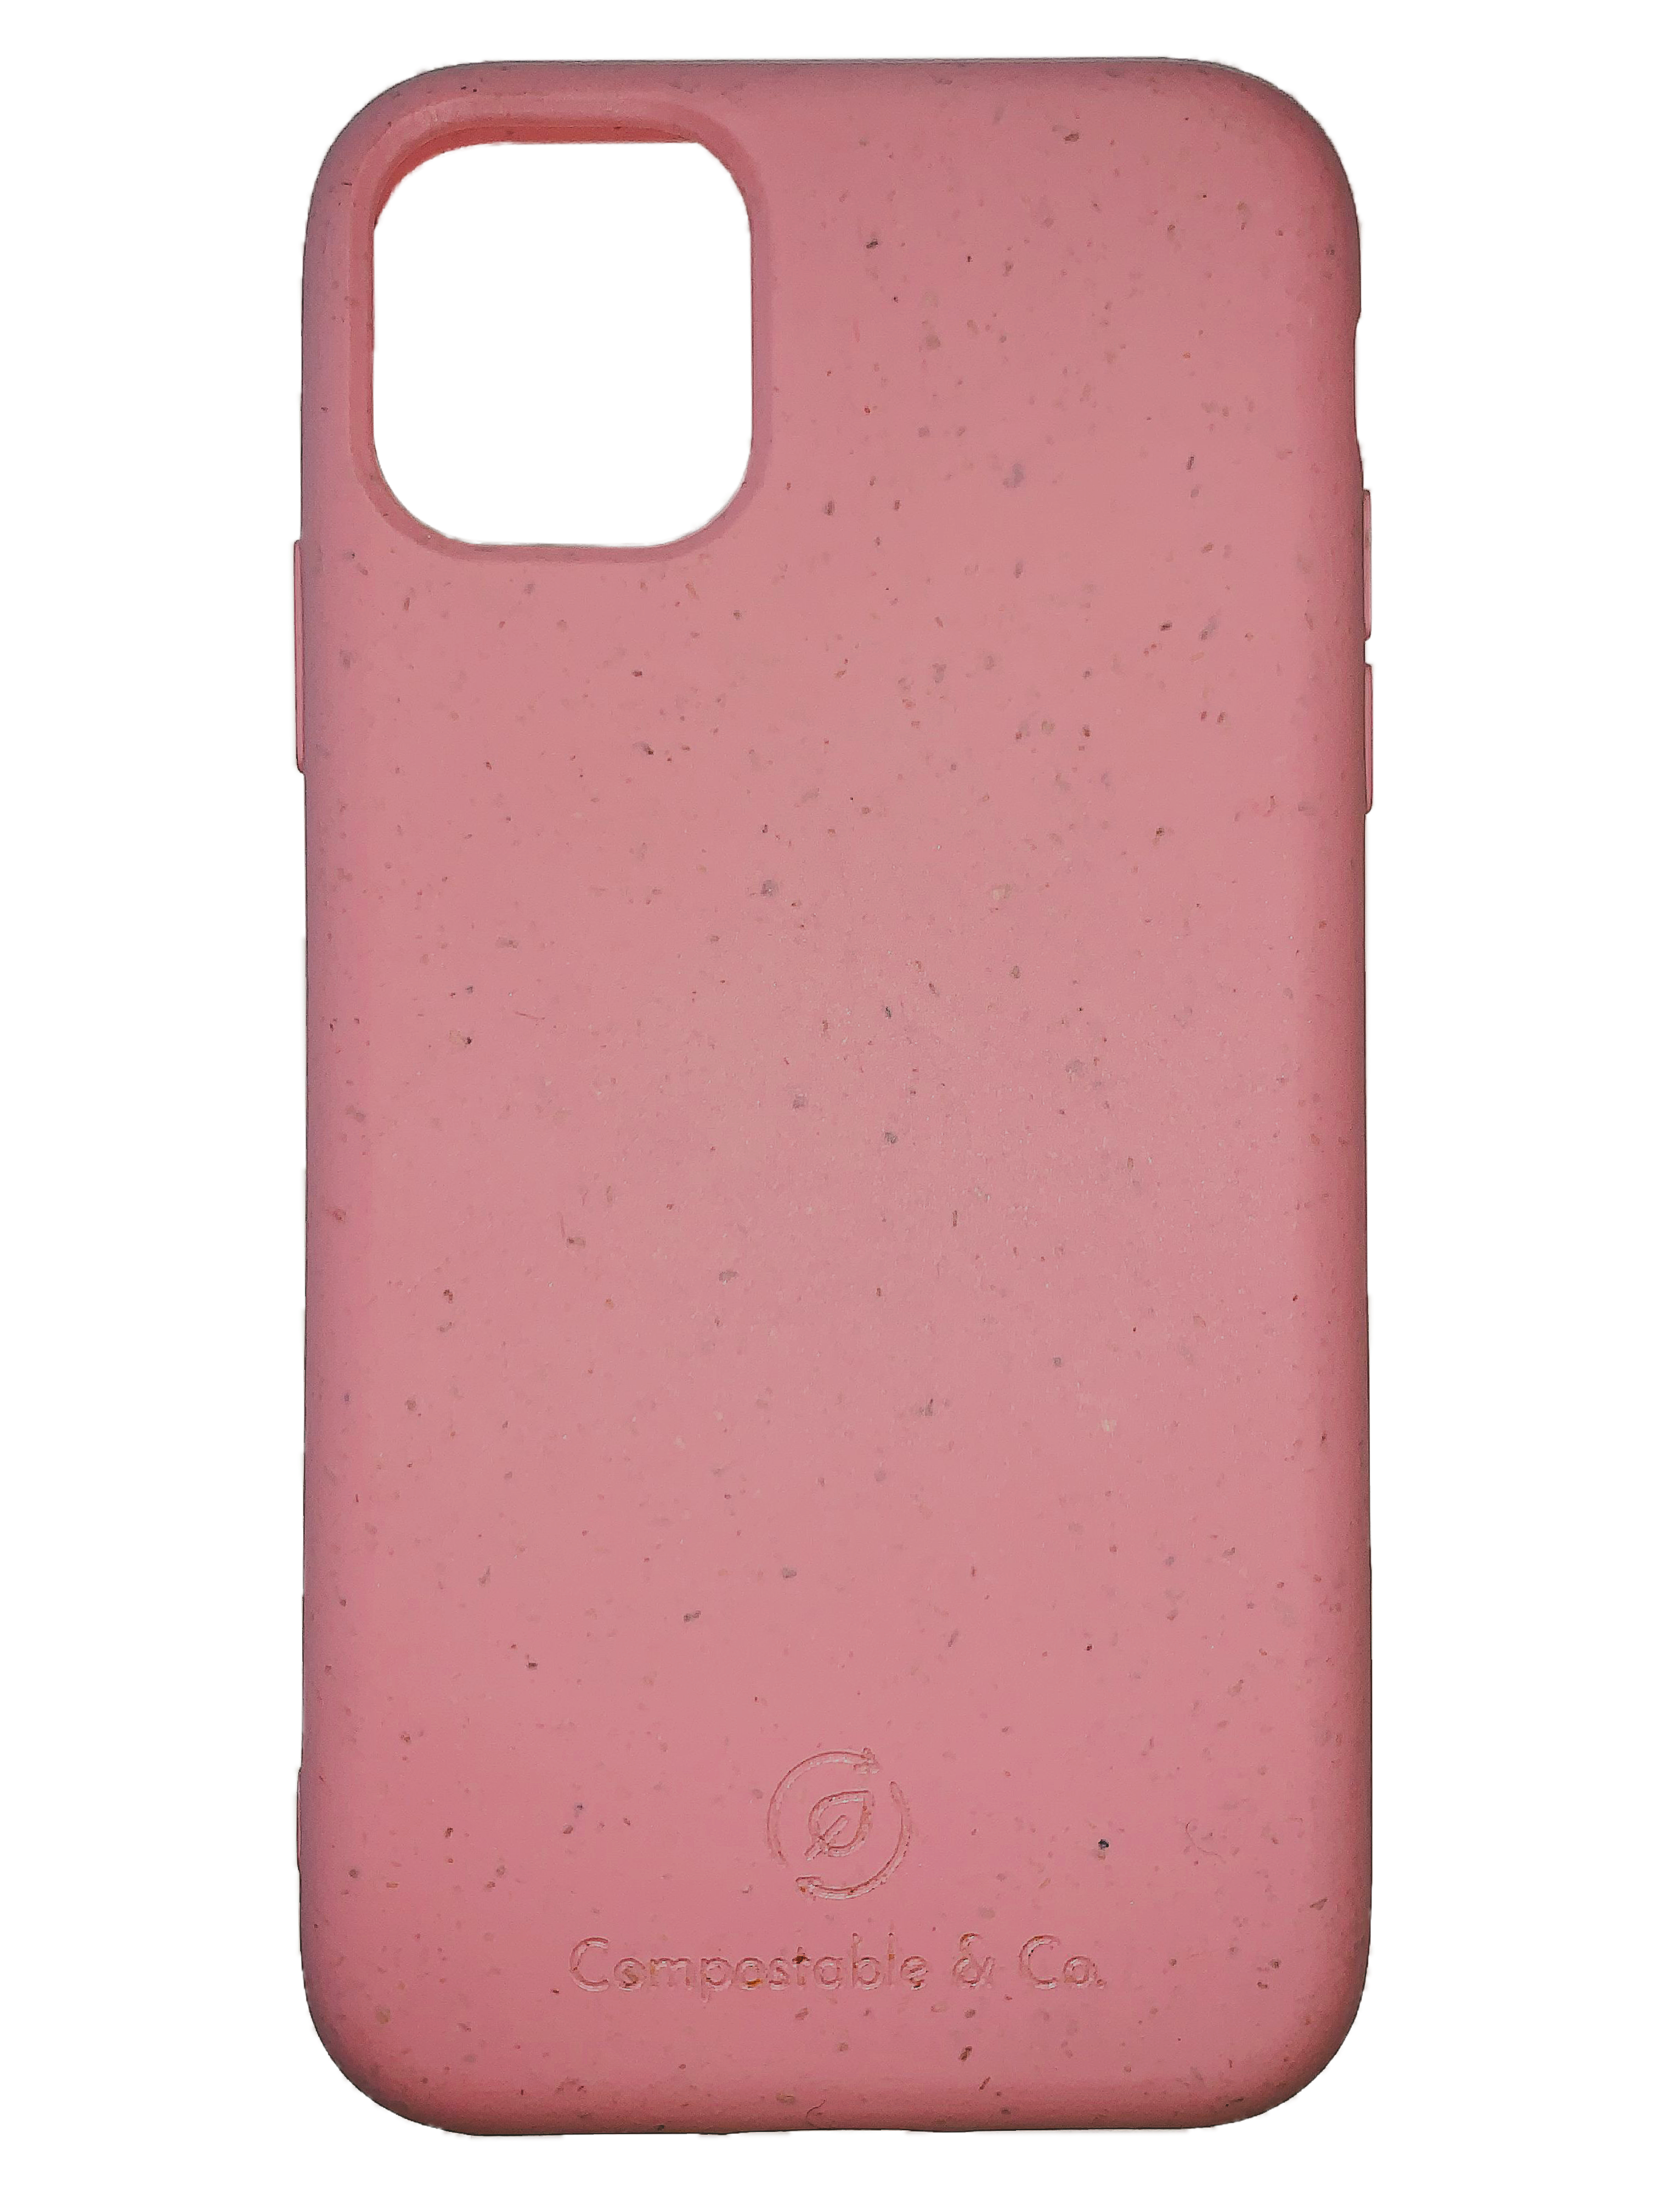 Compostable & Co. iPhone 11 pro pink biodegradable phone case